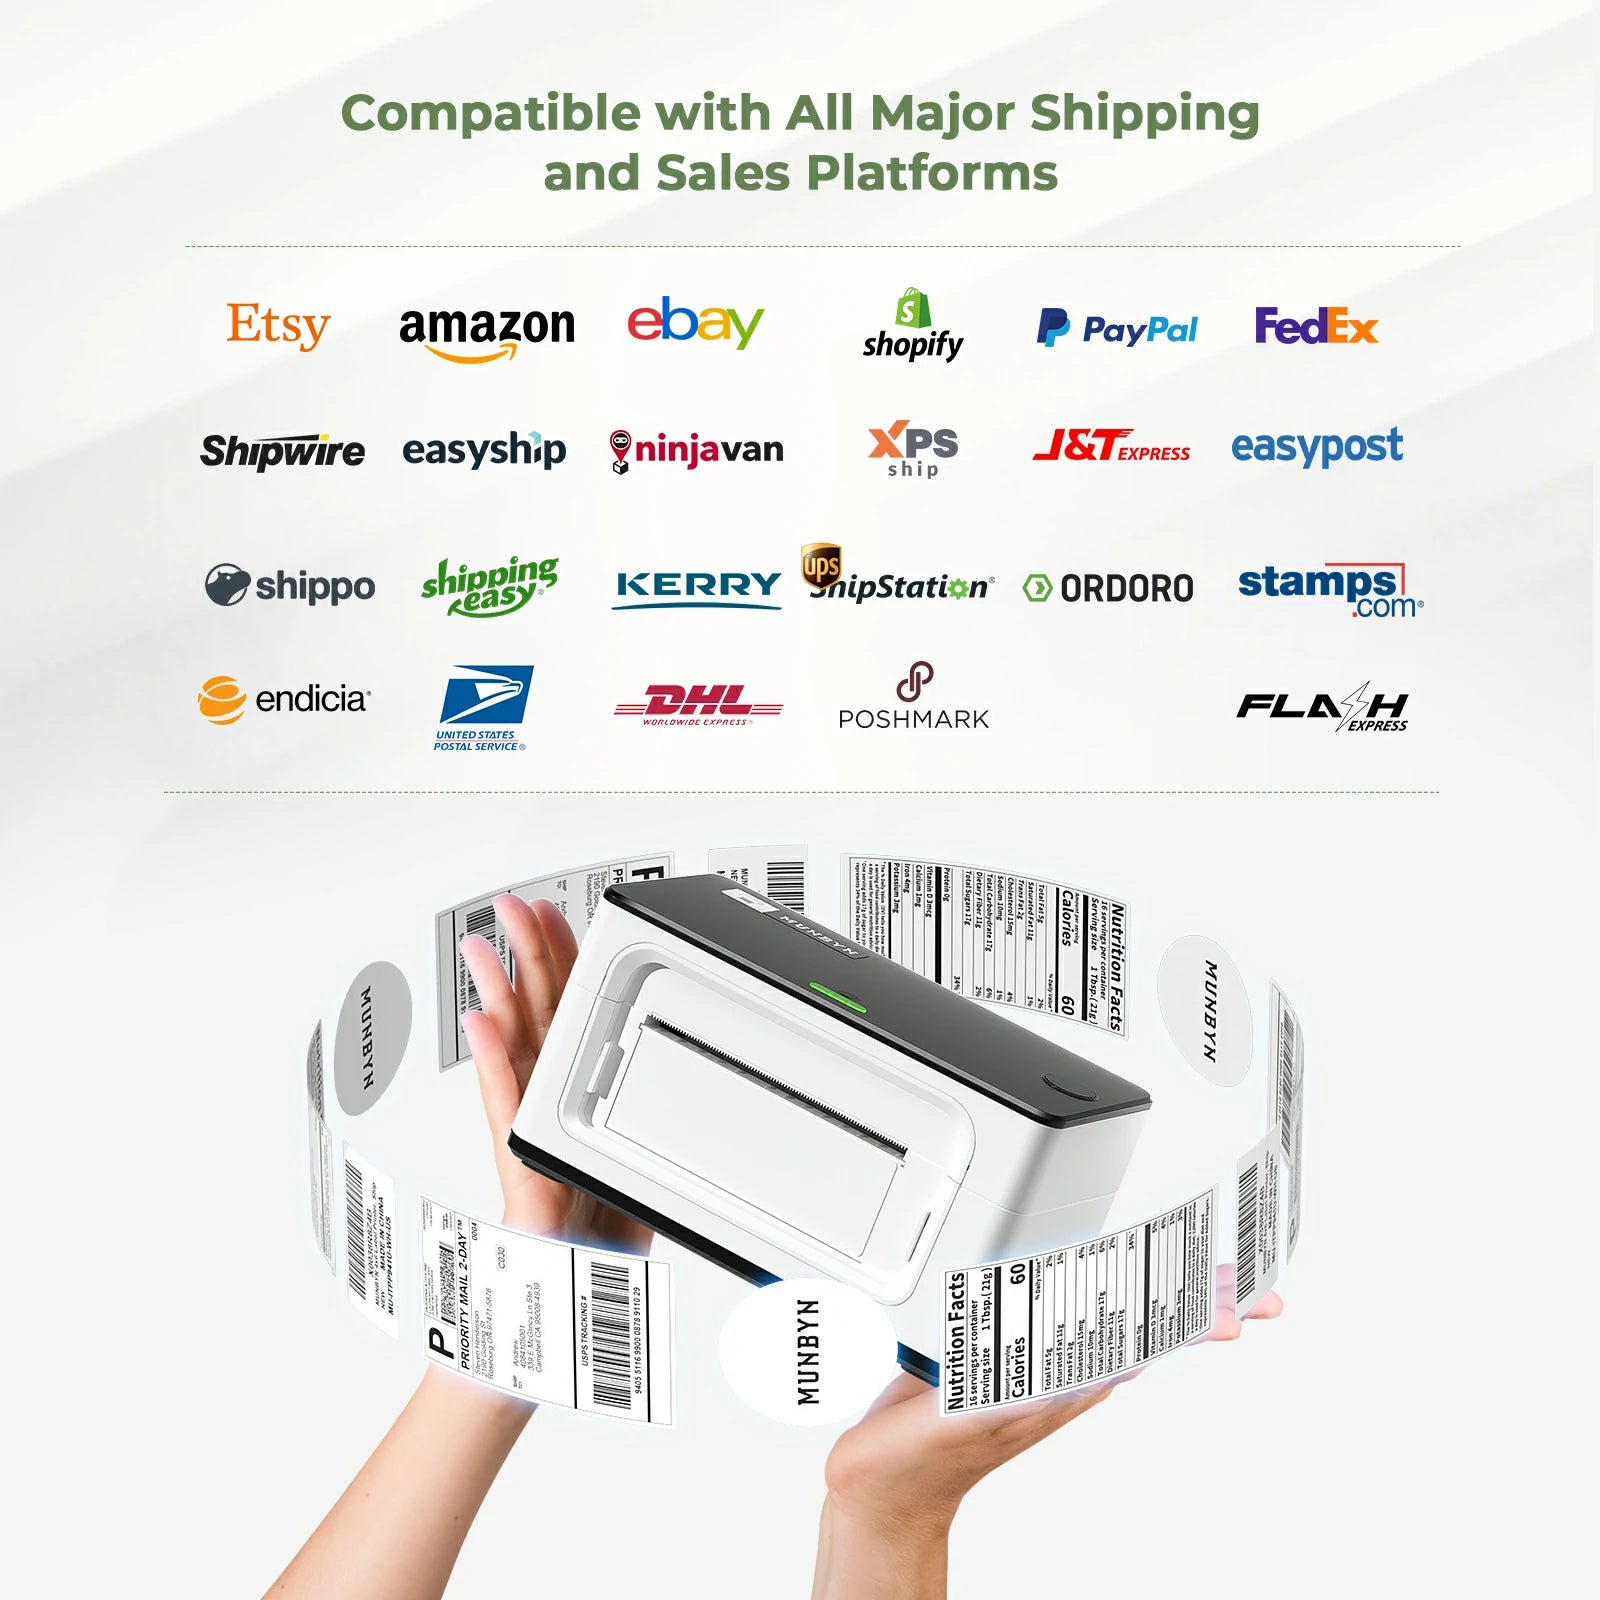 MUNBYN thermal printer for shipping labels is compatible with all major shipping and sales platforms.